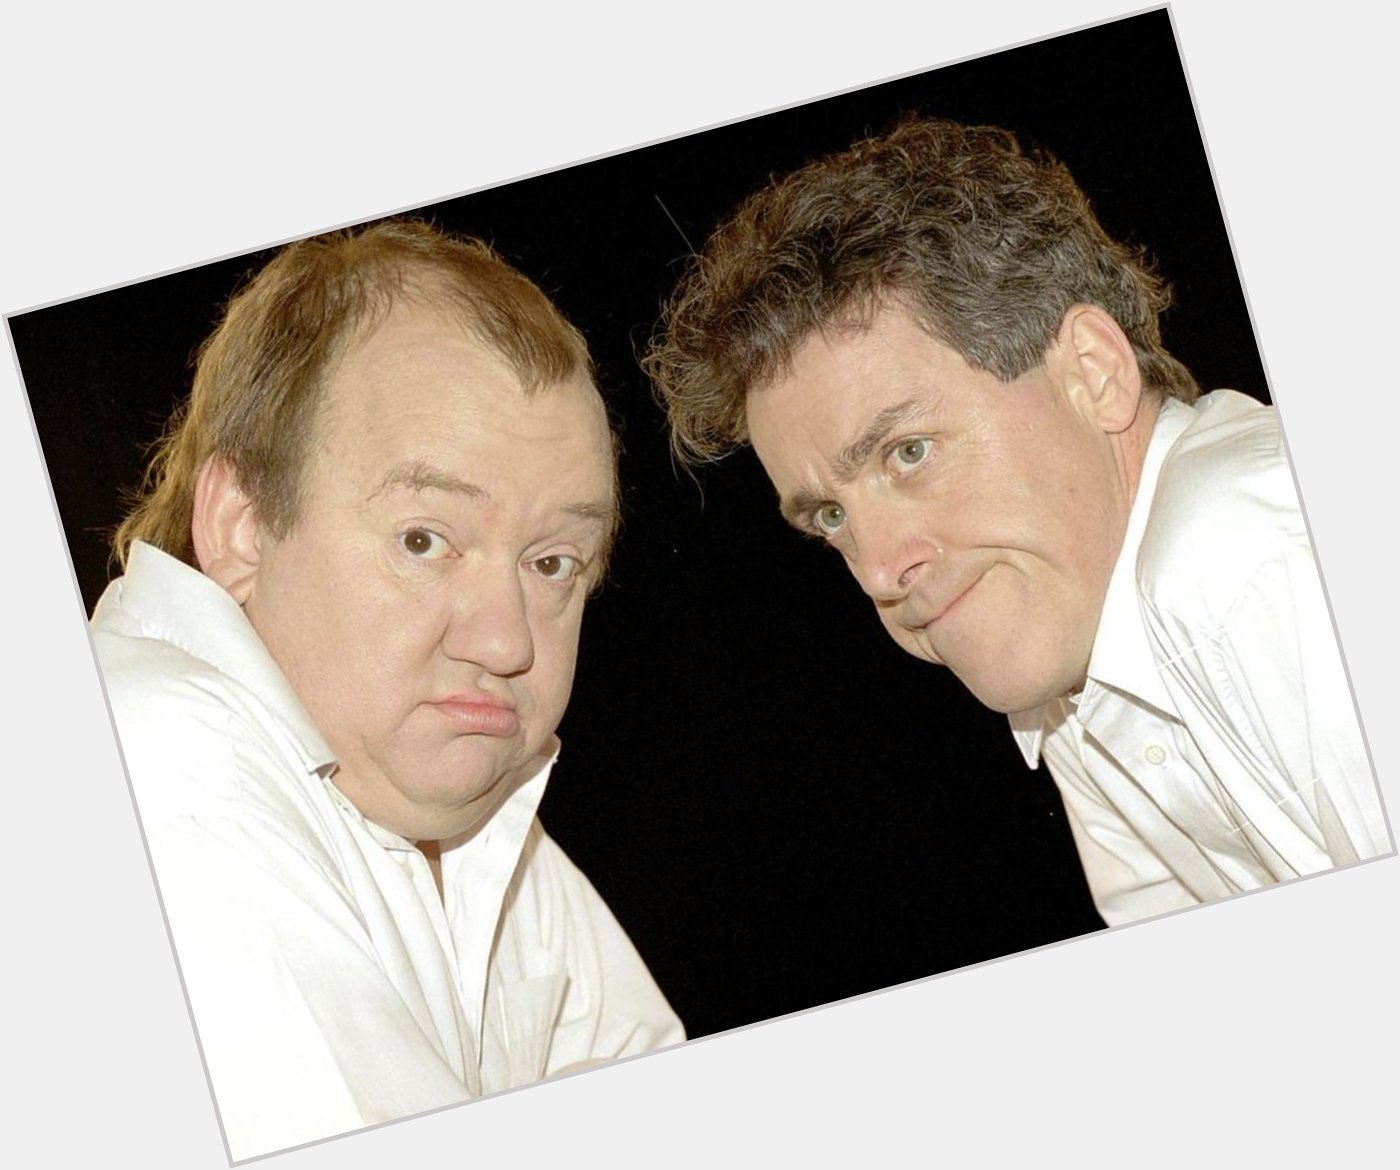 Happy birthday Hugh Laurie, seen here on the right with his comedy partner Stephen Fry. Born on this day in 1959 